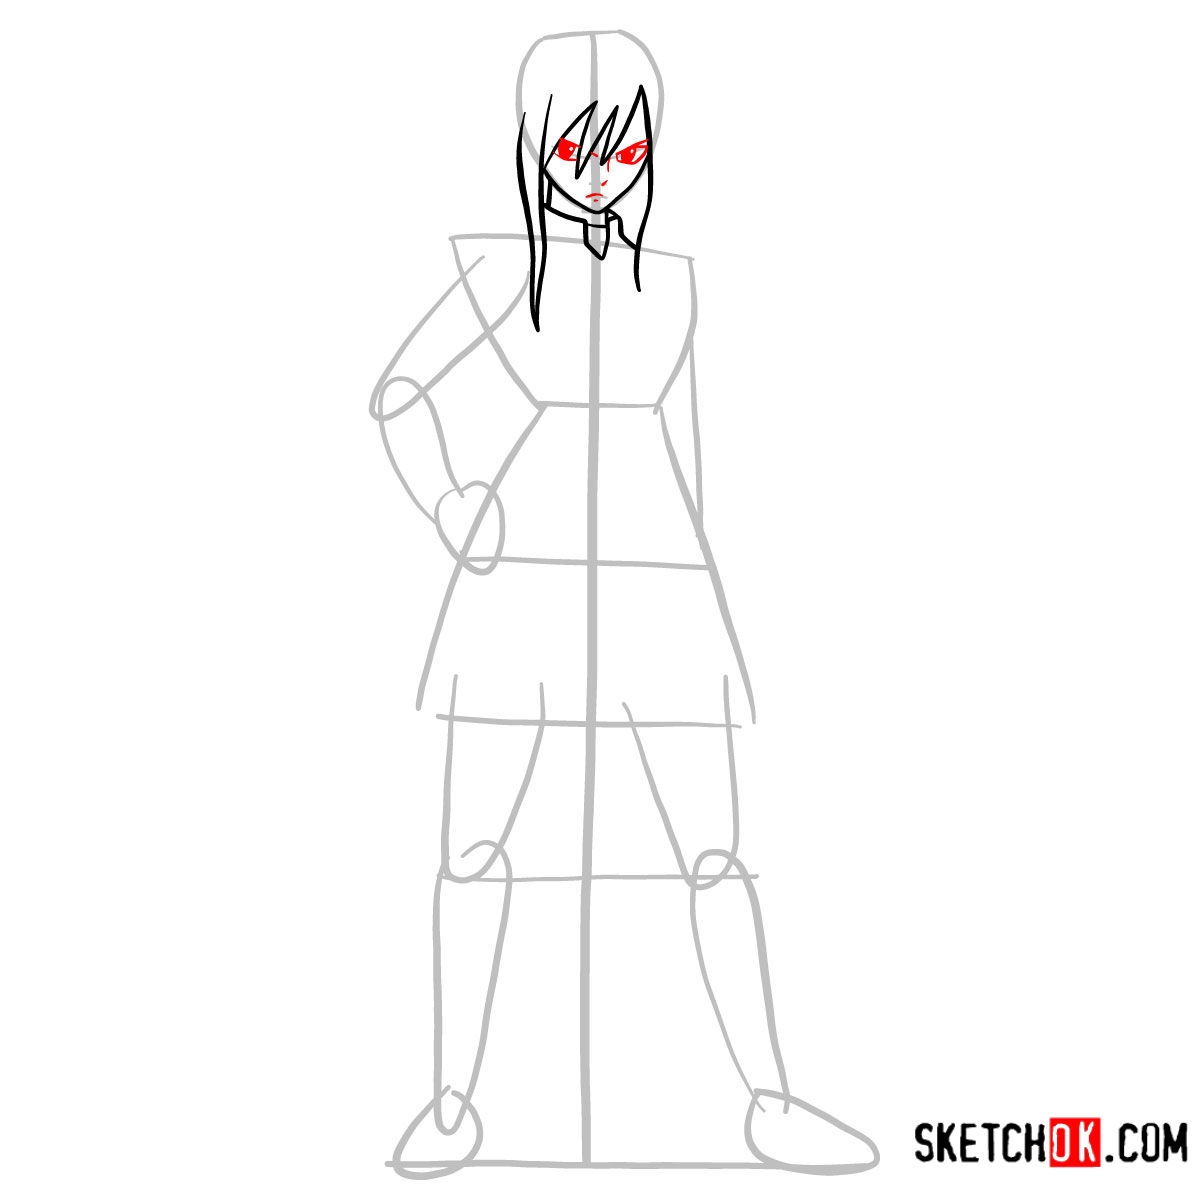 15 steps drawing tutorial of Erza Scarlet (fairy tail) - step 05